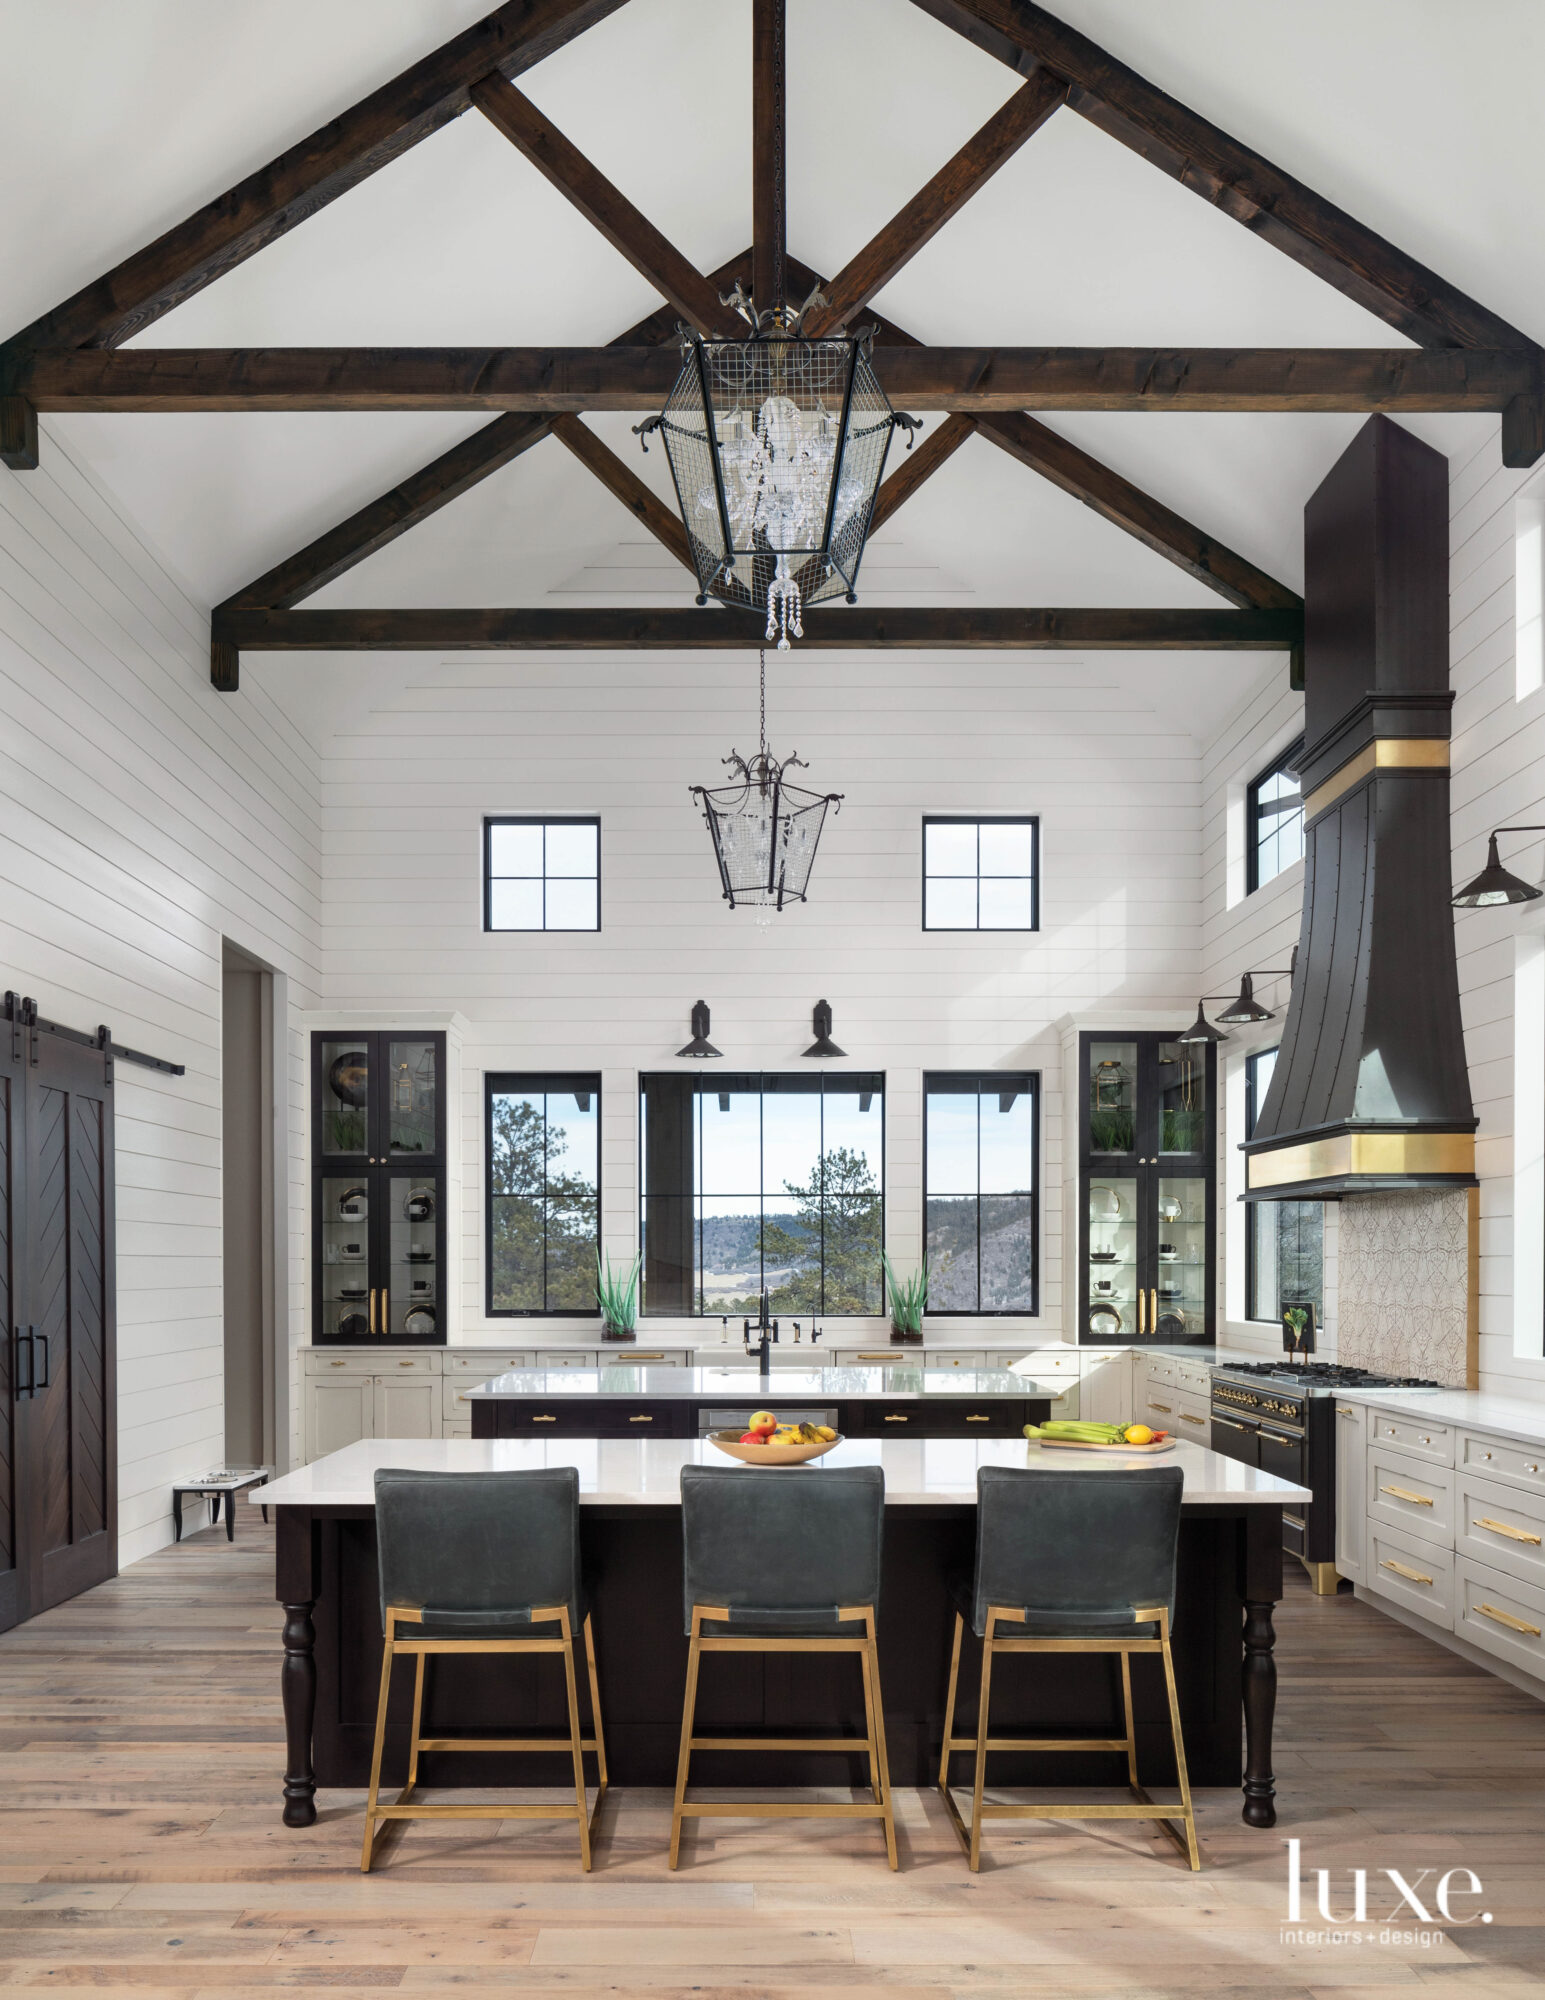 The modern farmhouse kitchen has high ceilings and grand dimensions